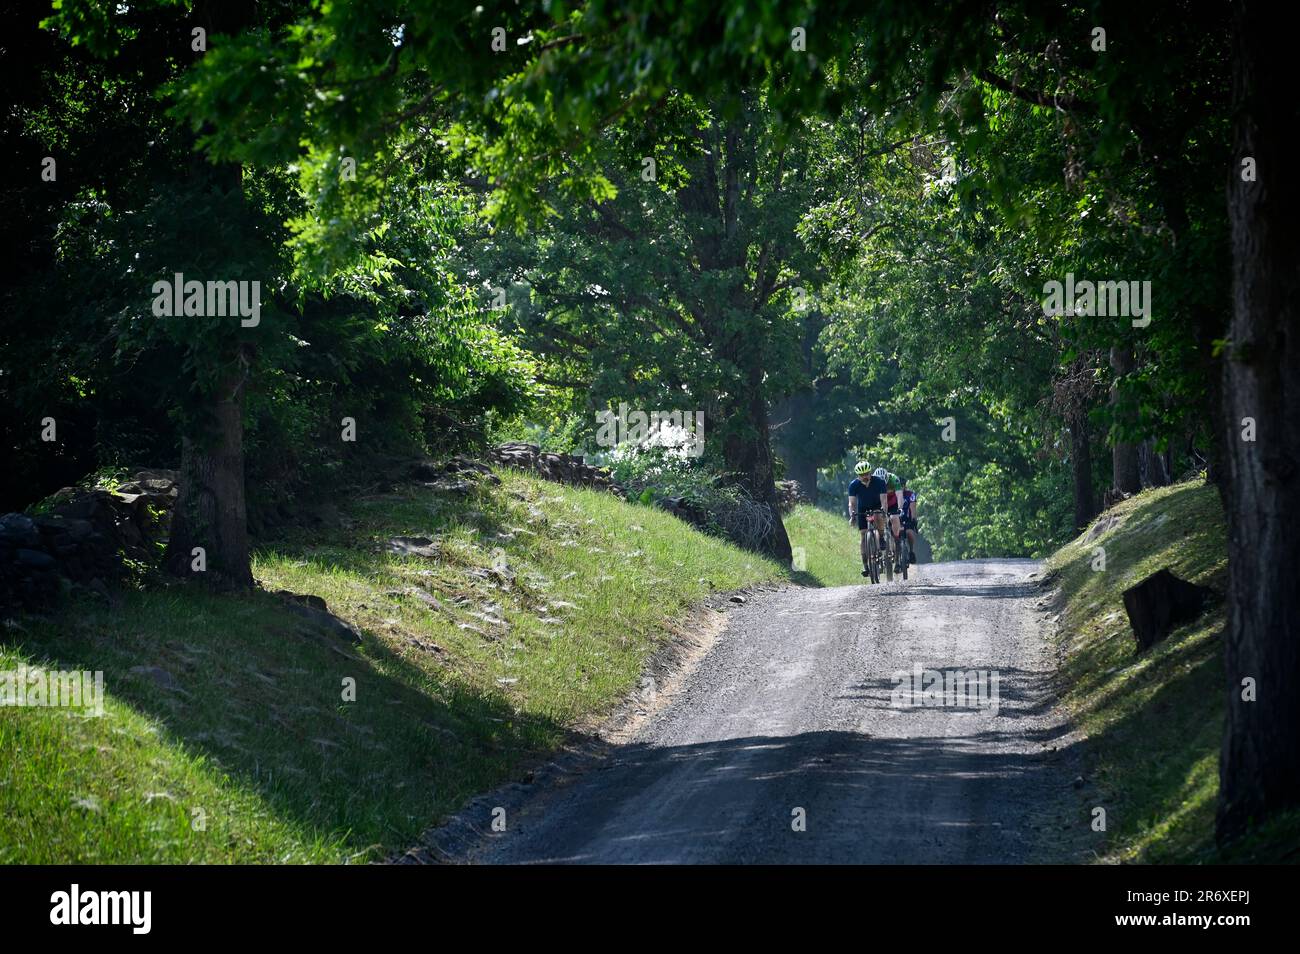 UNITED STATES - June 11, 2023:  The 5th annual Loudoun 1725 Gravel Grinder put on by EX2 Adventures as a benefit ride for America's Routes. The fun ri Stock Photo